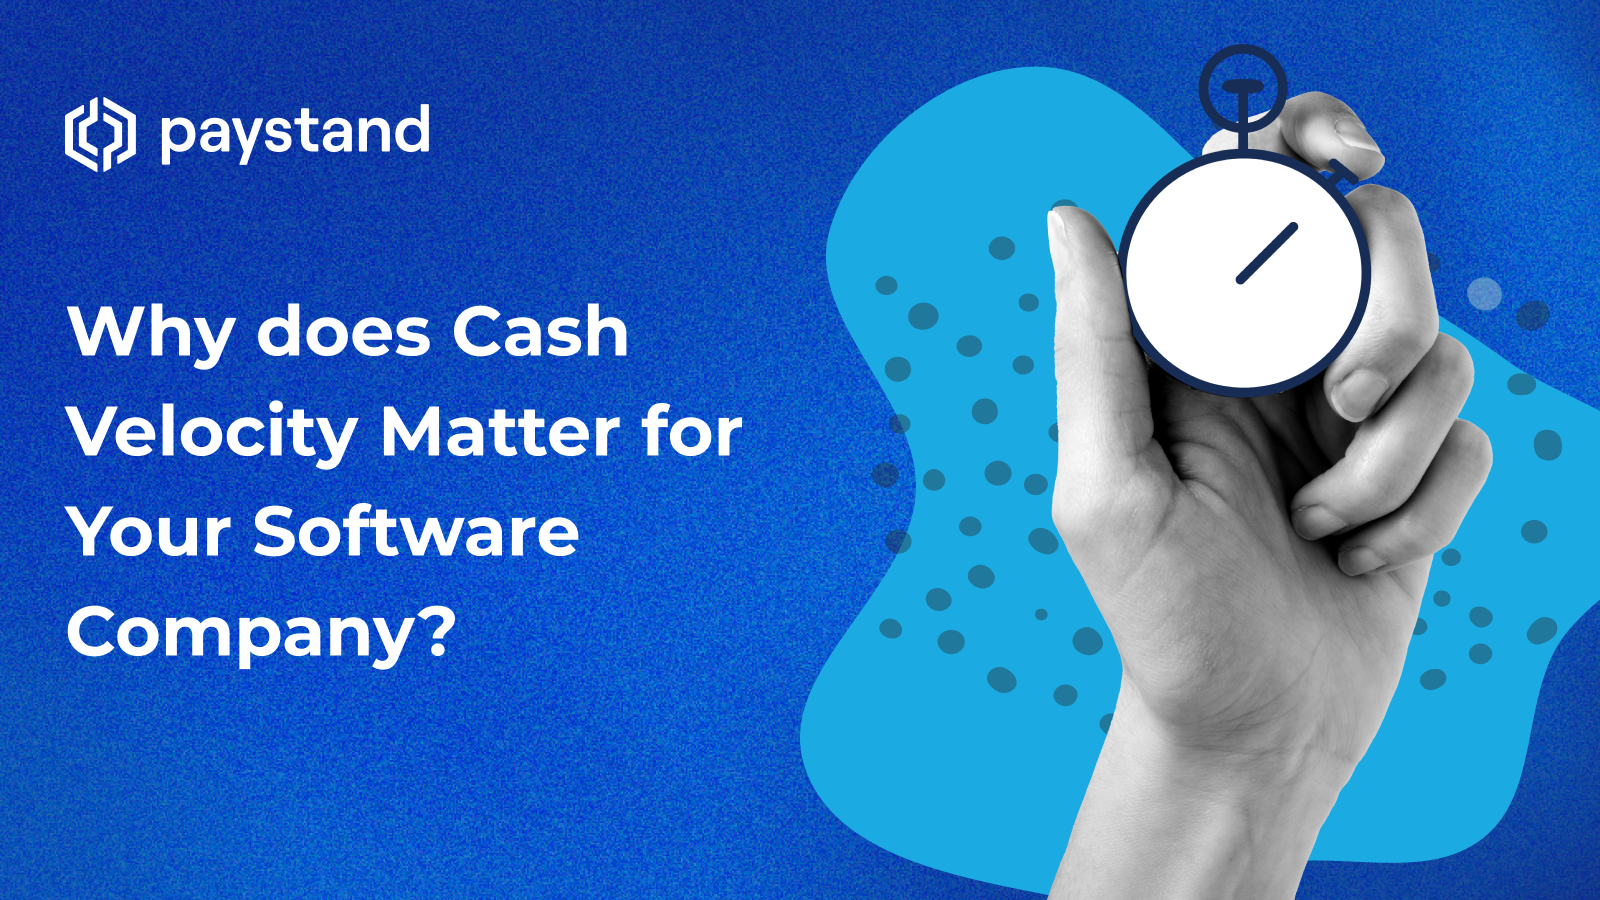 Why does Cash Velocity Matter for Your Software Company?